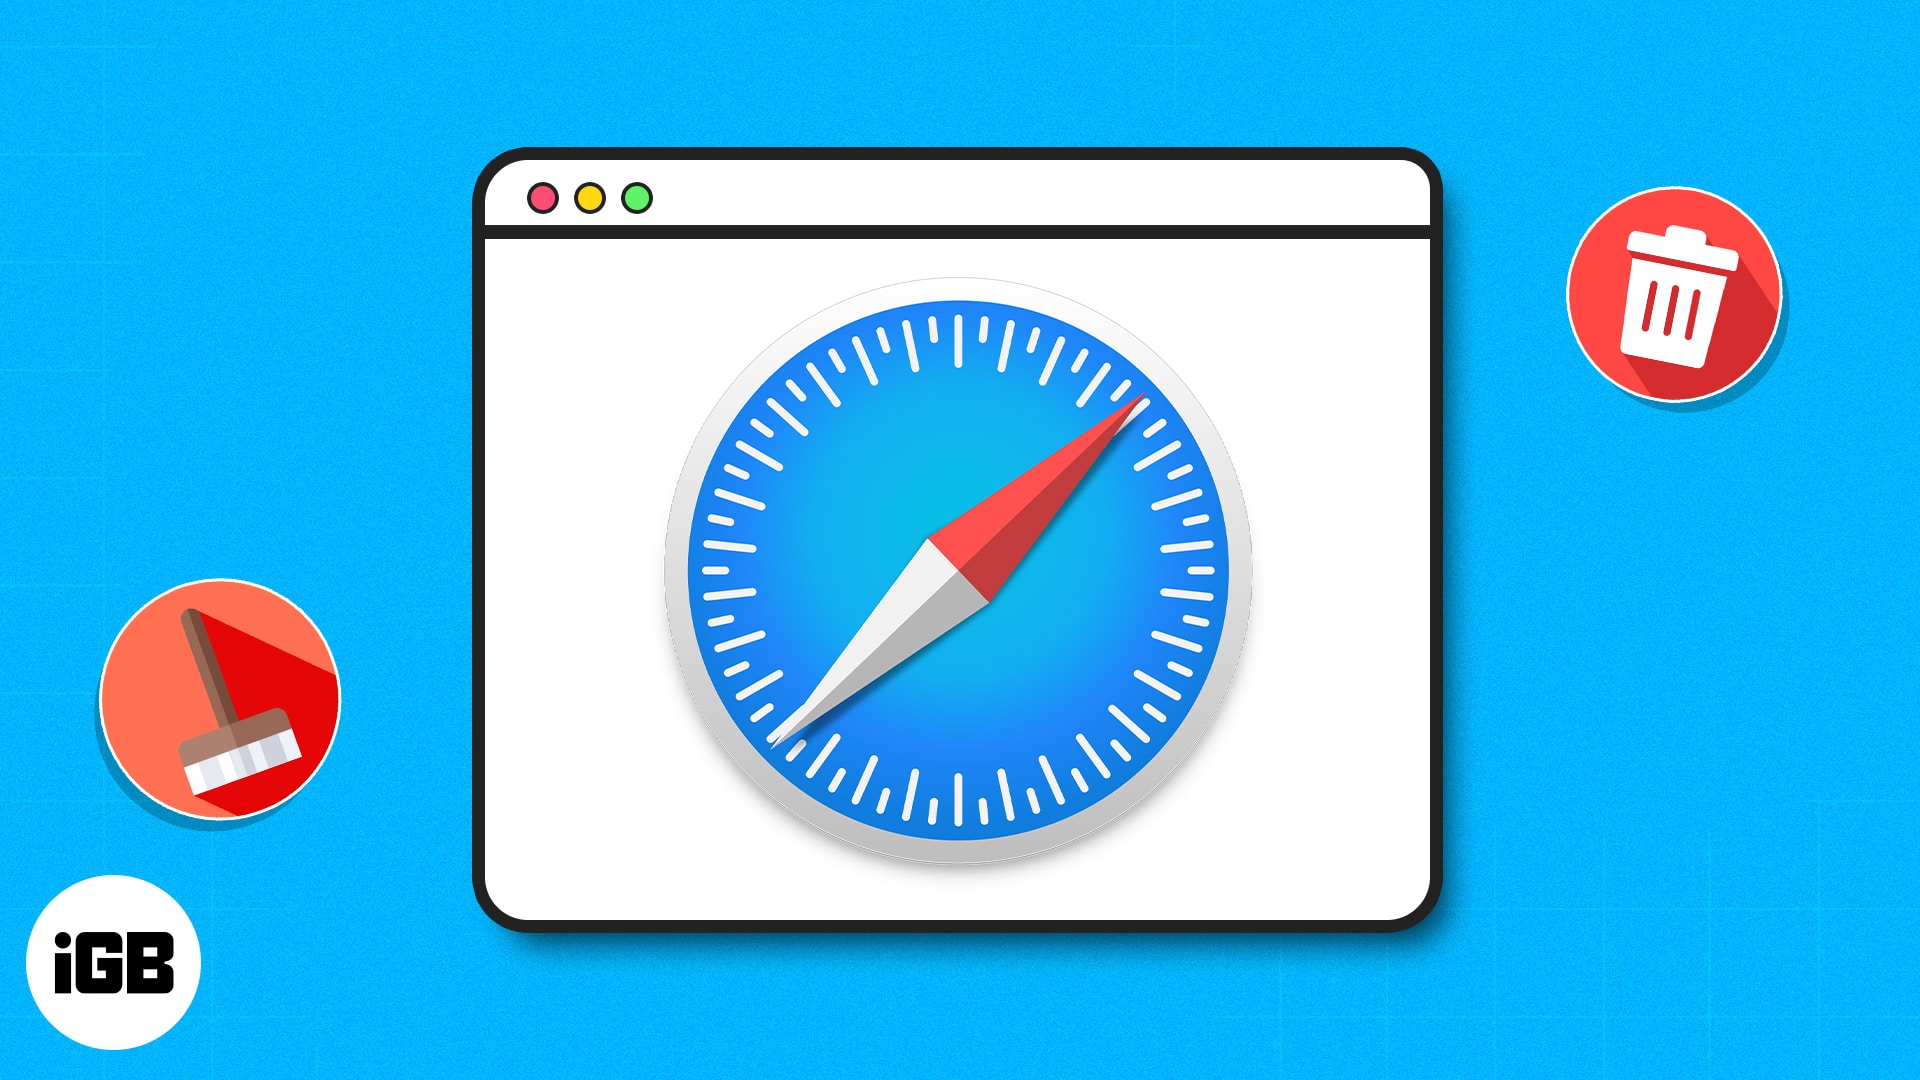 Clear safari cache history and cookies on mac